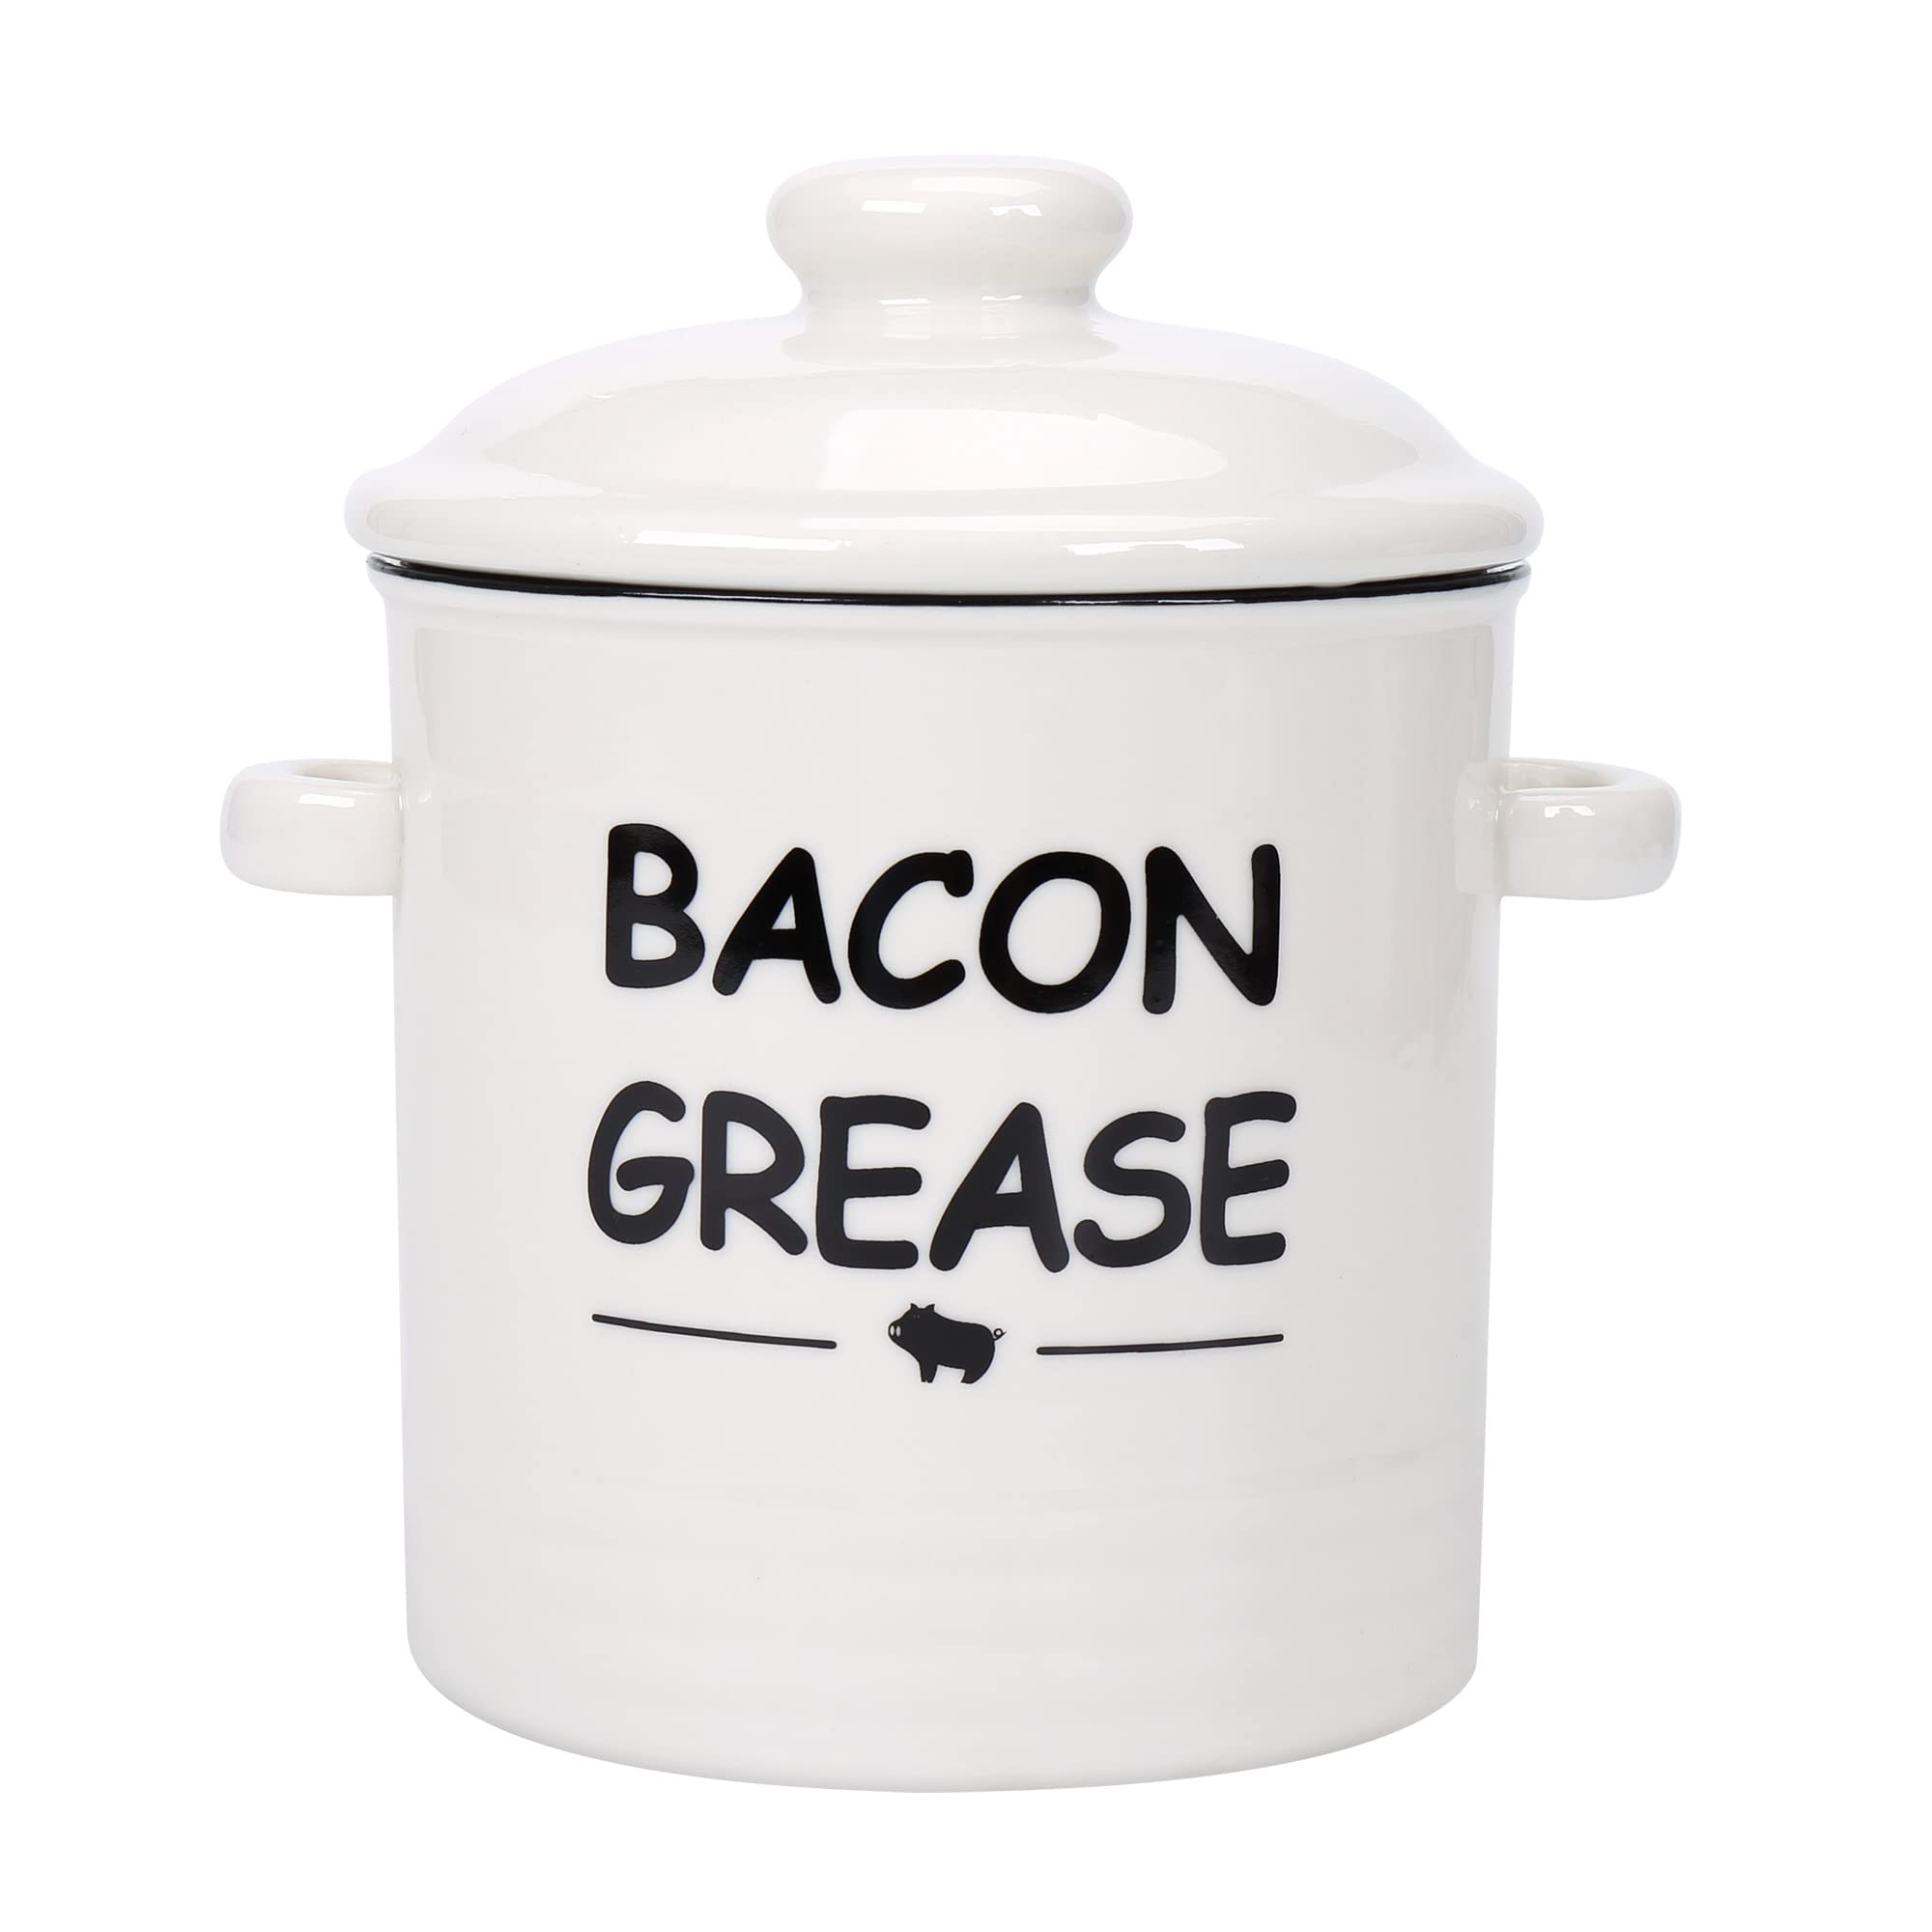 Ceramic Bacon Grease Container Keeper with Strainer,Turquoise